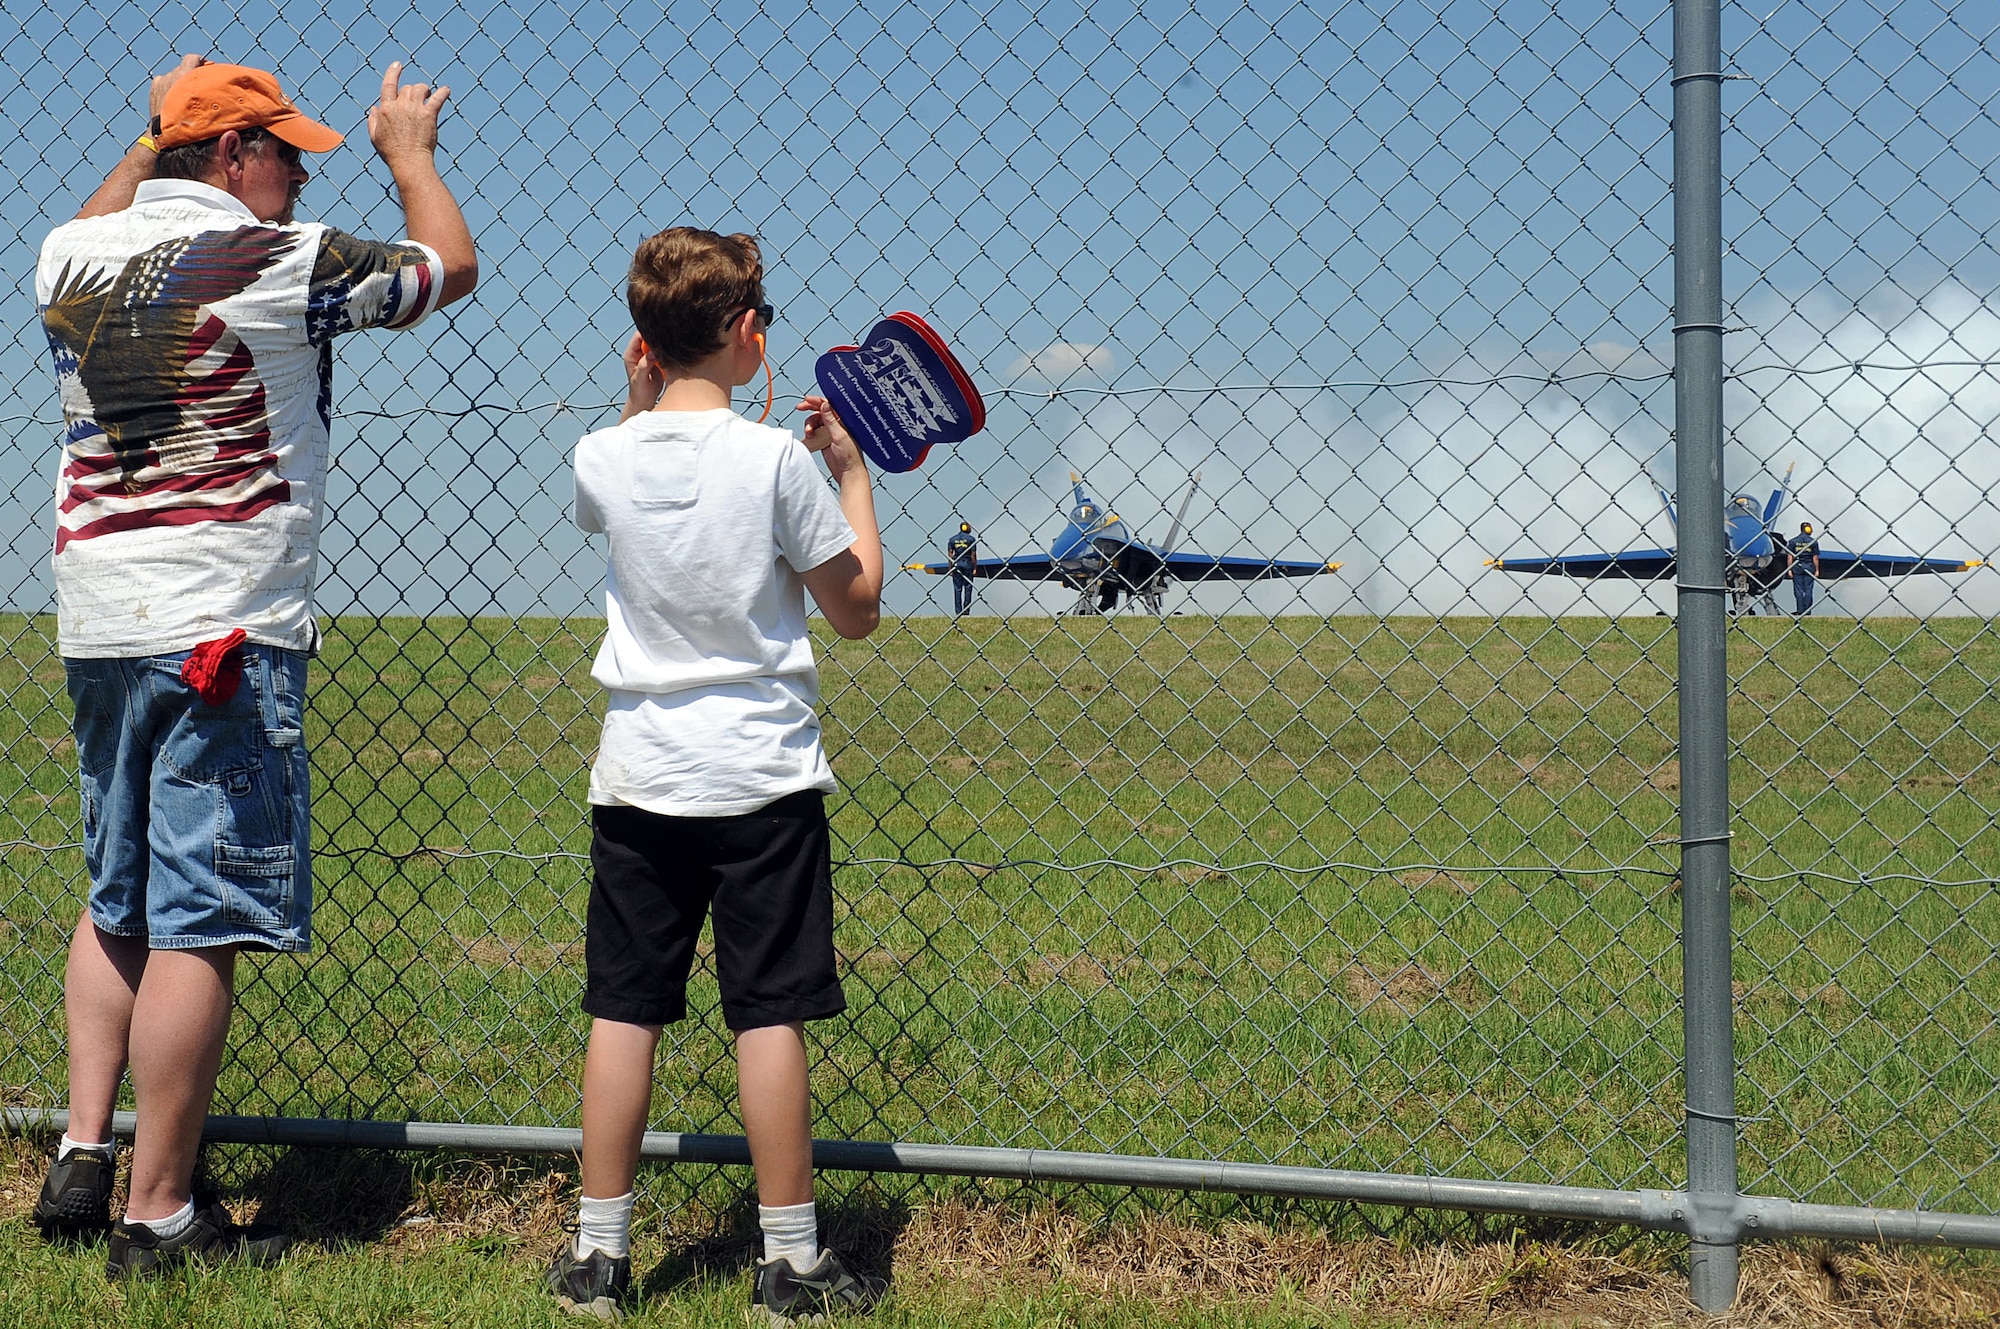 Dudley Hall and his 11-year-old son, Hunter, peer through the fence at the Blue Angels as they prepare for flight at the 2012 Robins Air Show. (U.S. Air Force photo by Tommie Horton)